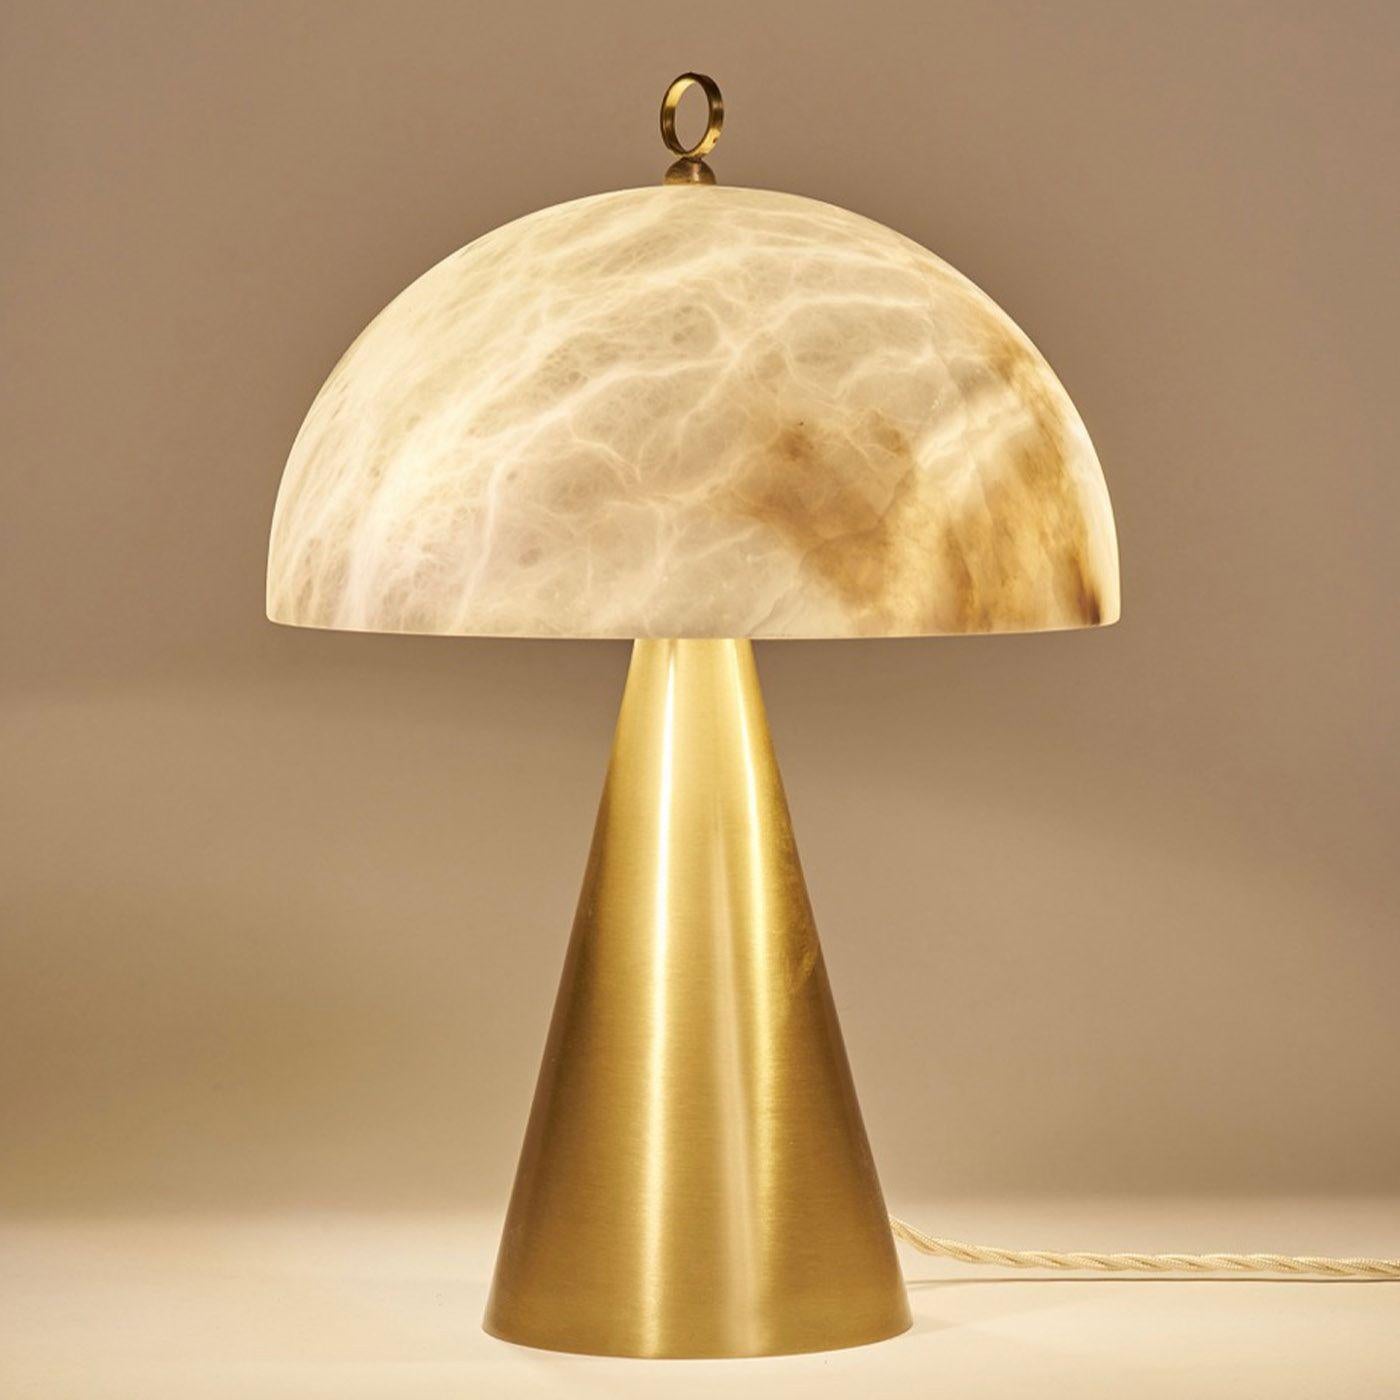 A small and compact table lamp composed of a conic brass base with a semi-spheric alabaster cover. It is suitable for bedside tables and wall cabinets. It is also available with inverted base and cover materials to match in the same ambience.